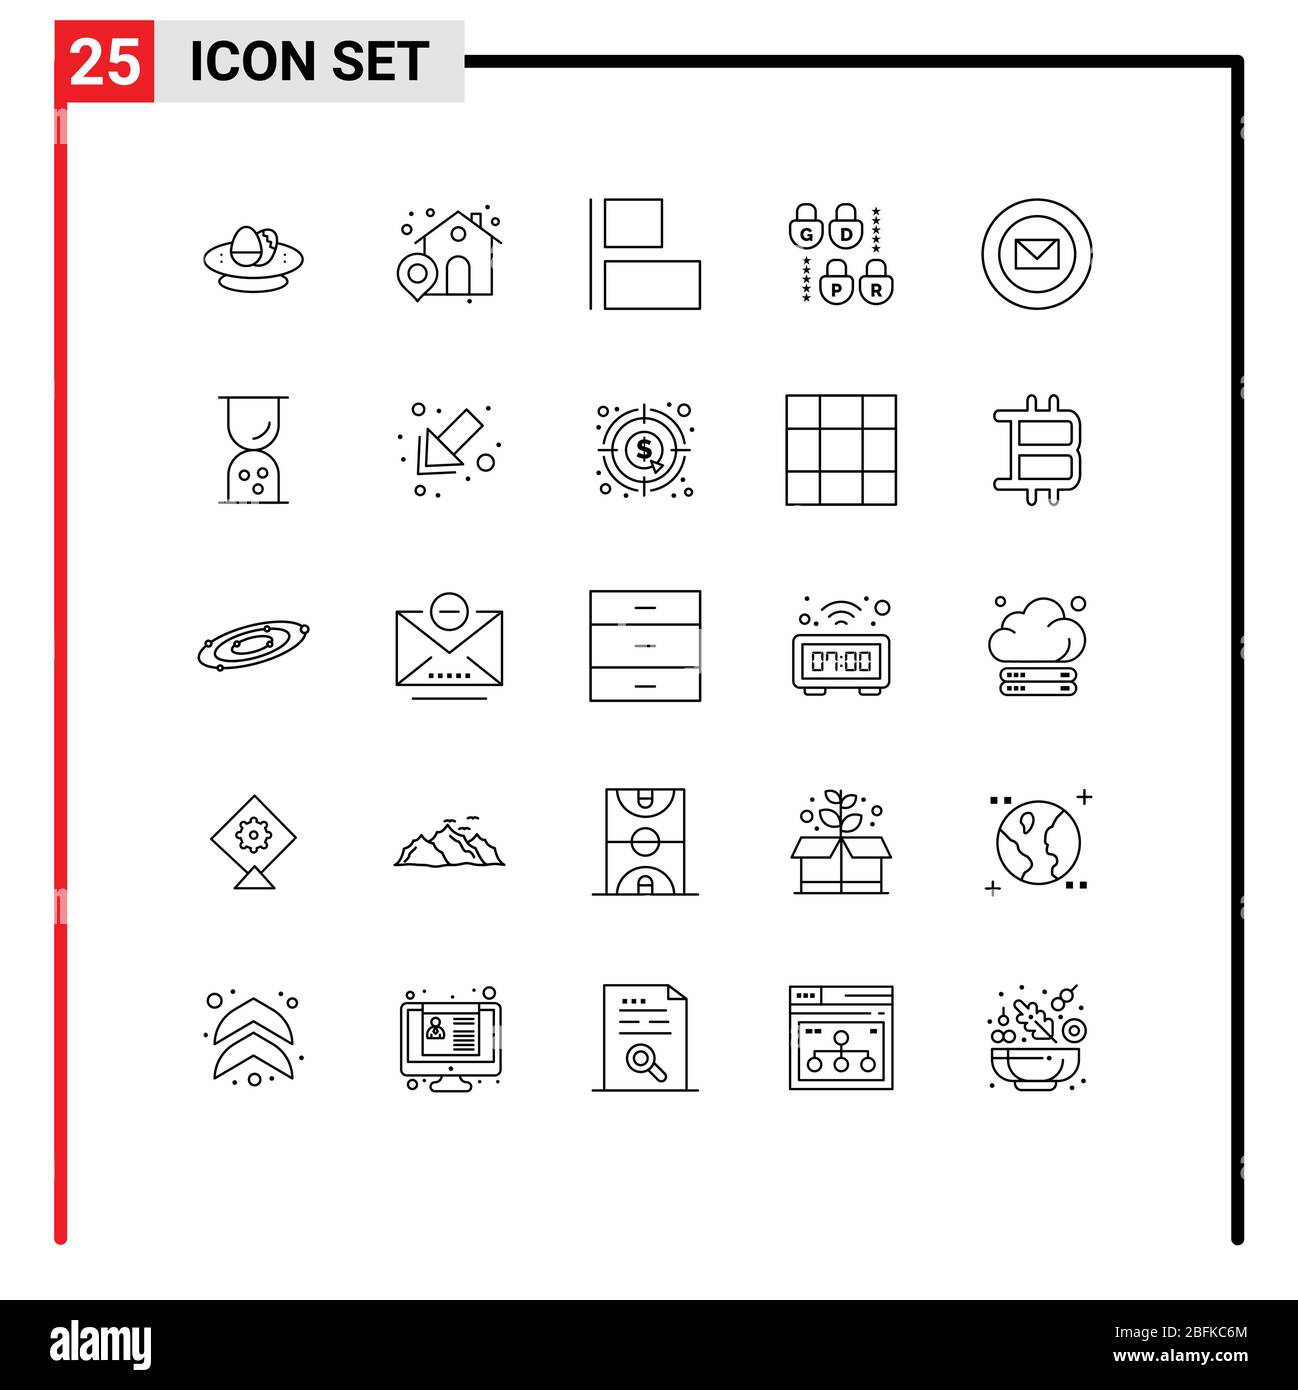 Pictogram Set of 25 Simple Lines of stamps, ribbon, align, mail, lock Editable Vector Design Elements Stock Vector